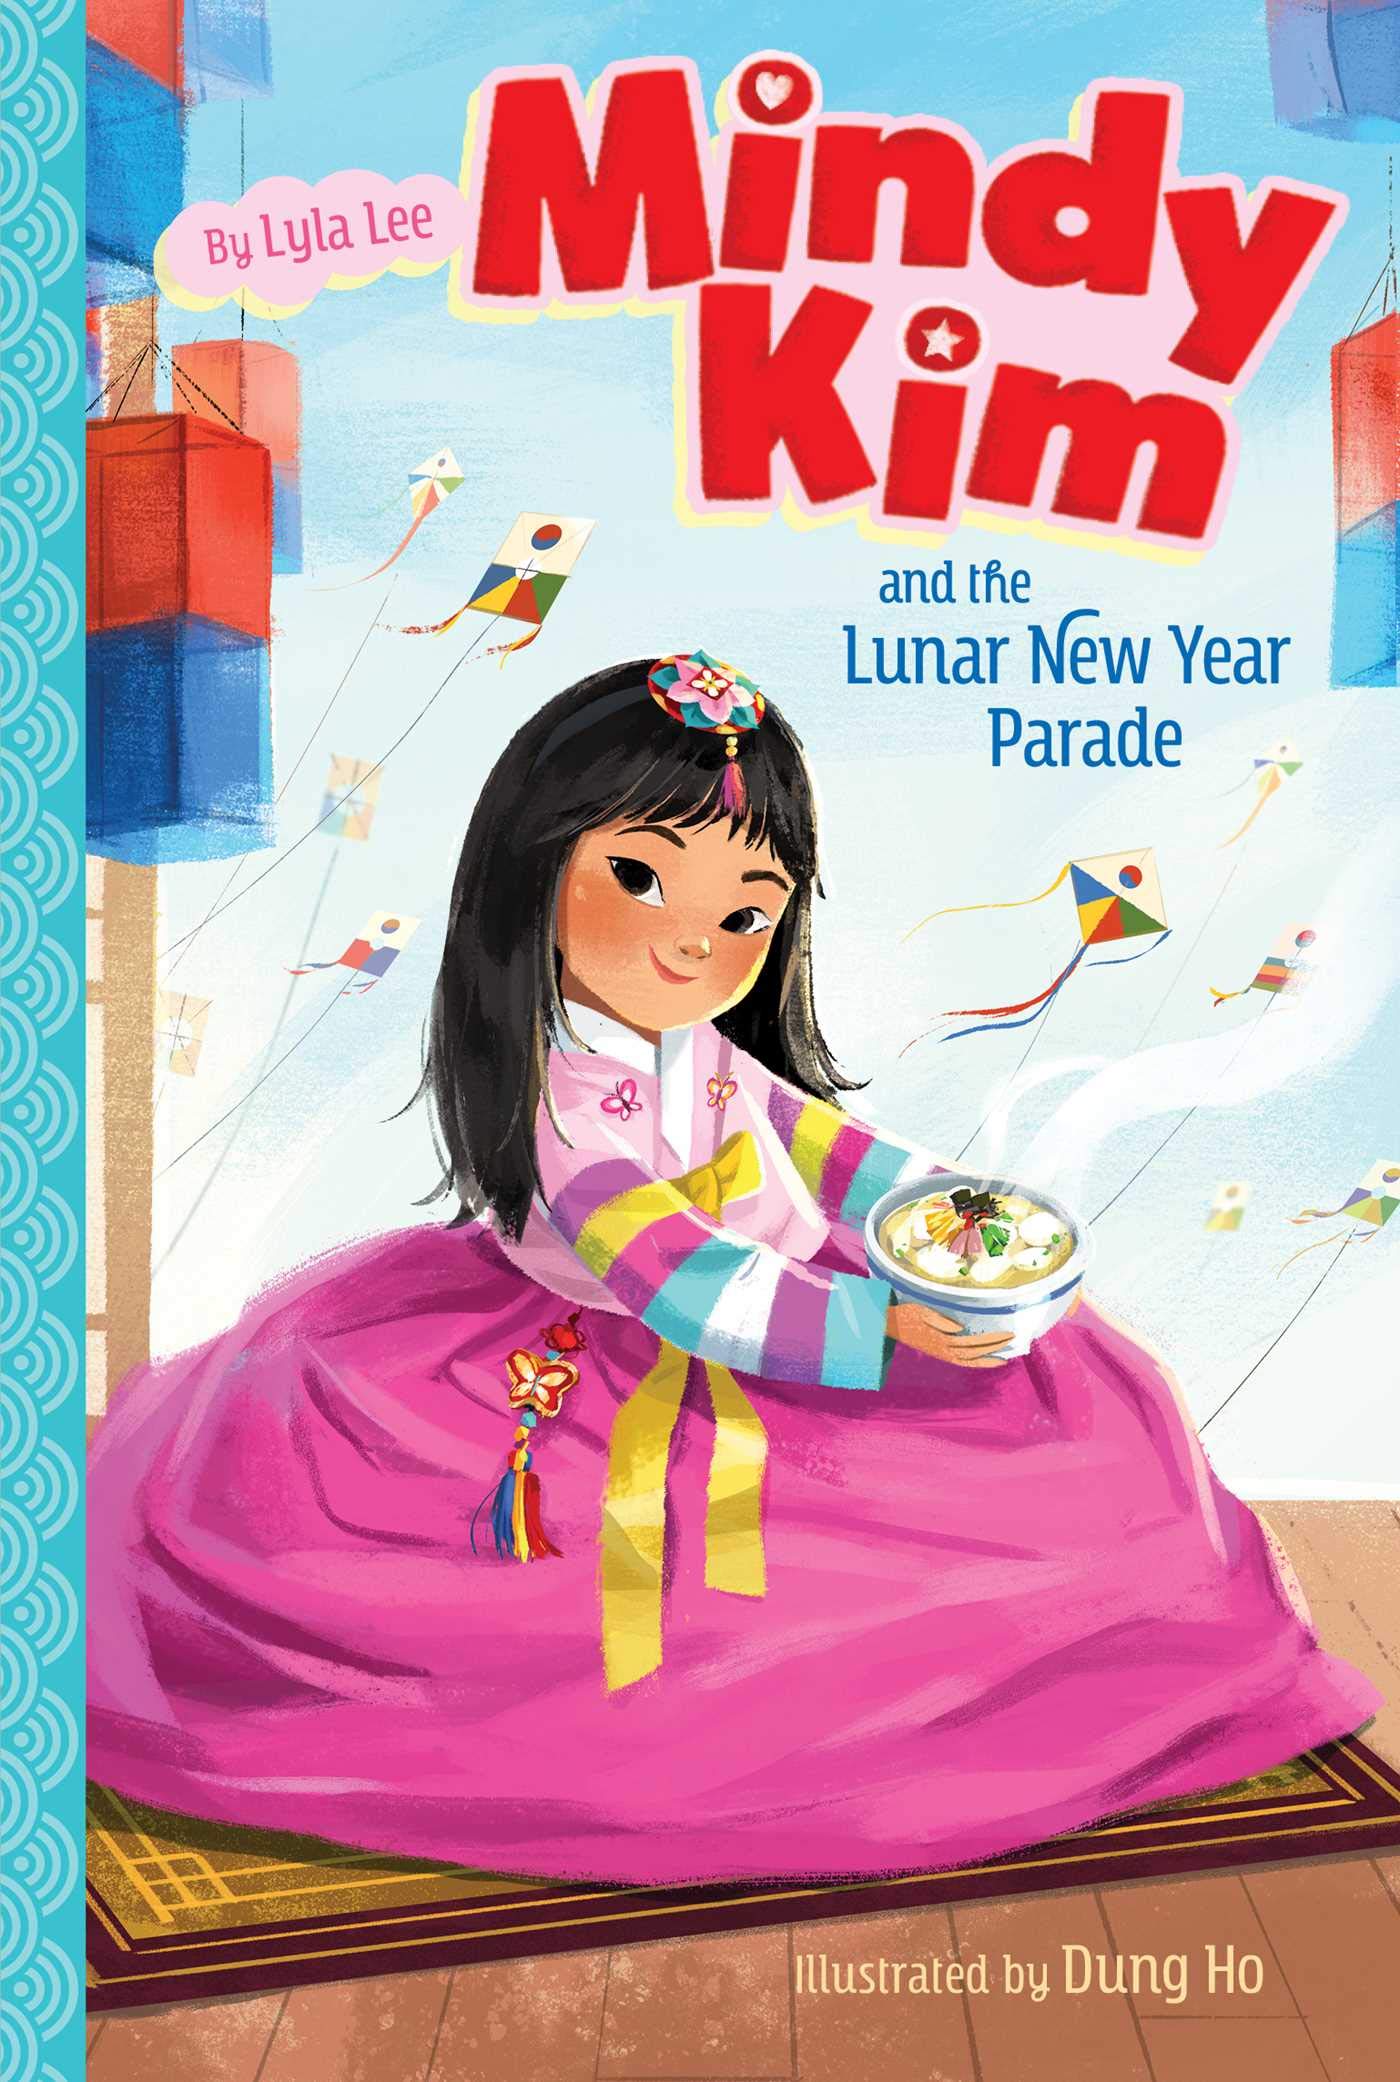 "Mindy Kim and the Lunar New Year Parade" book cover